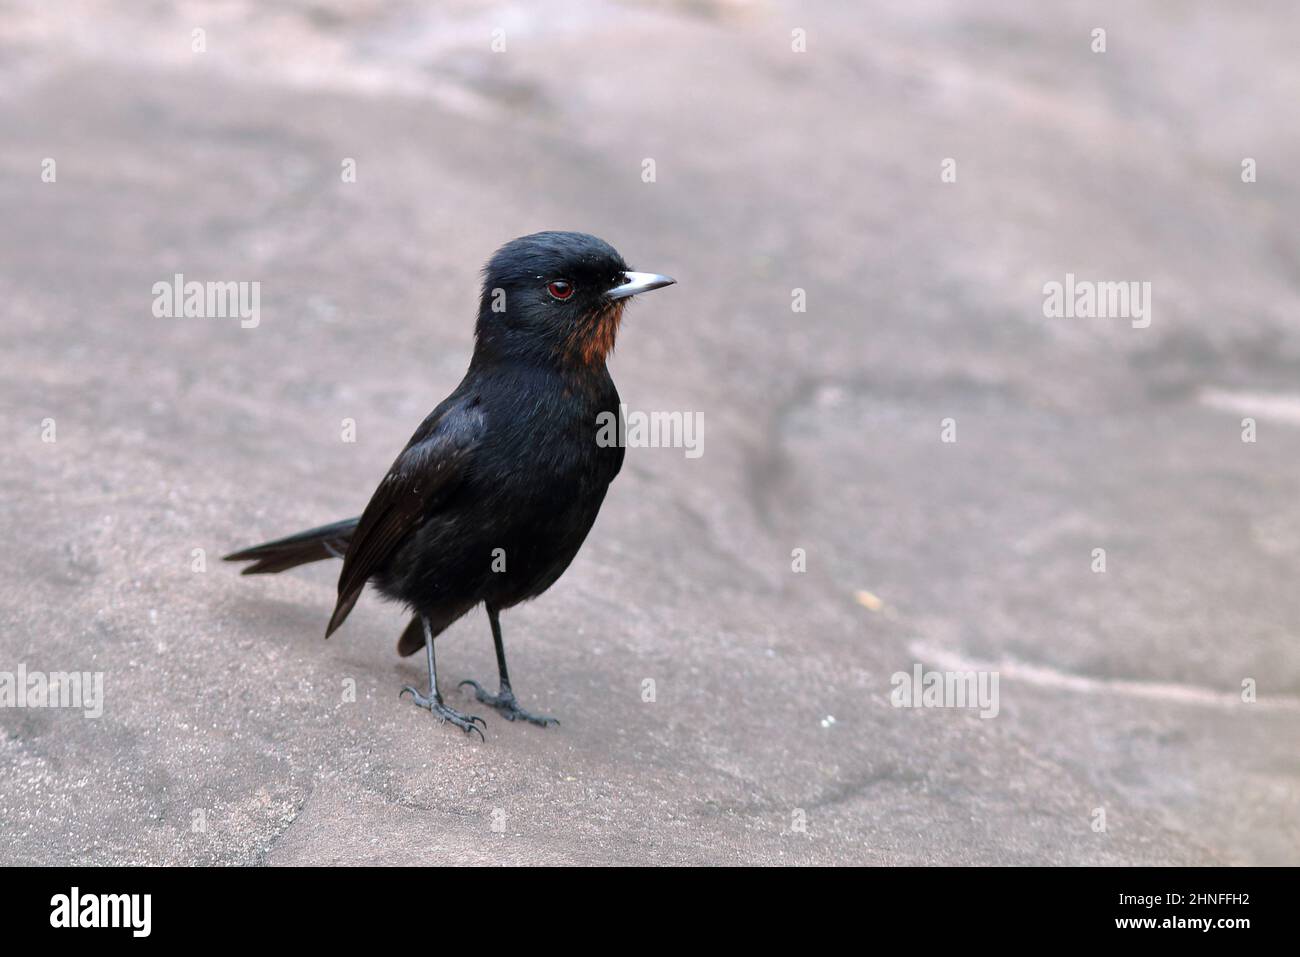 Velvety Black-Tyrant (Knipolegus nigerrimus) perched on the ground (rock), on the way to the Fumaça waterfall Stock Photo